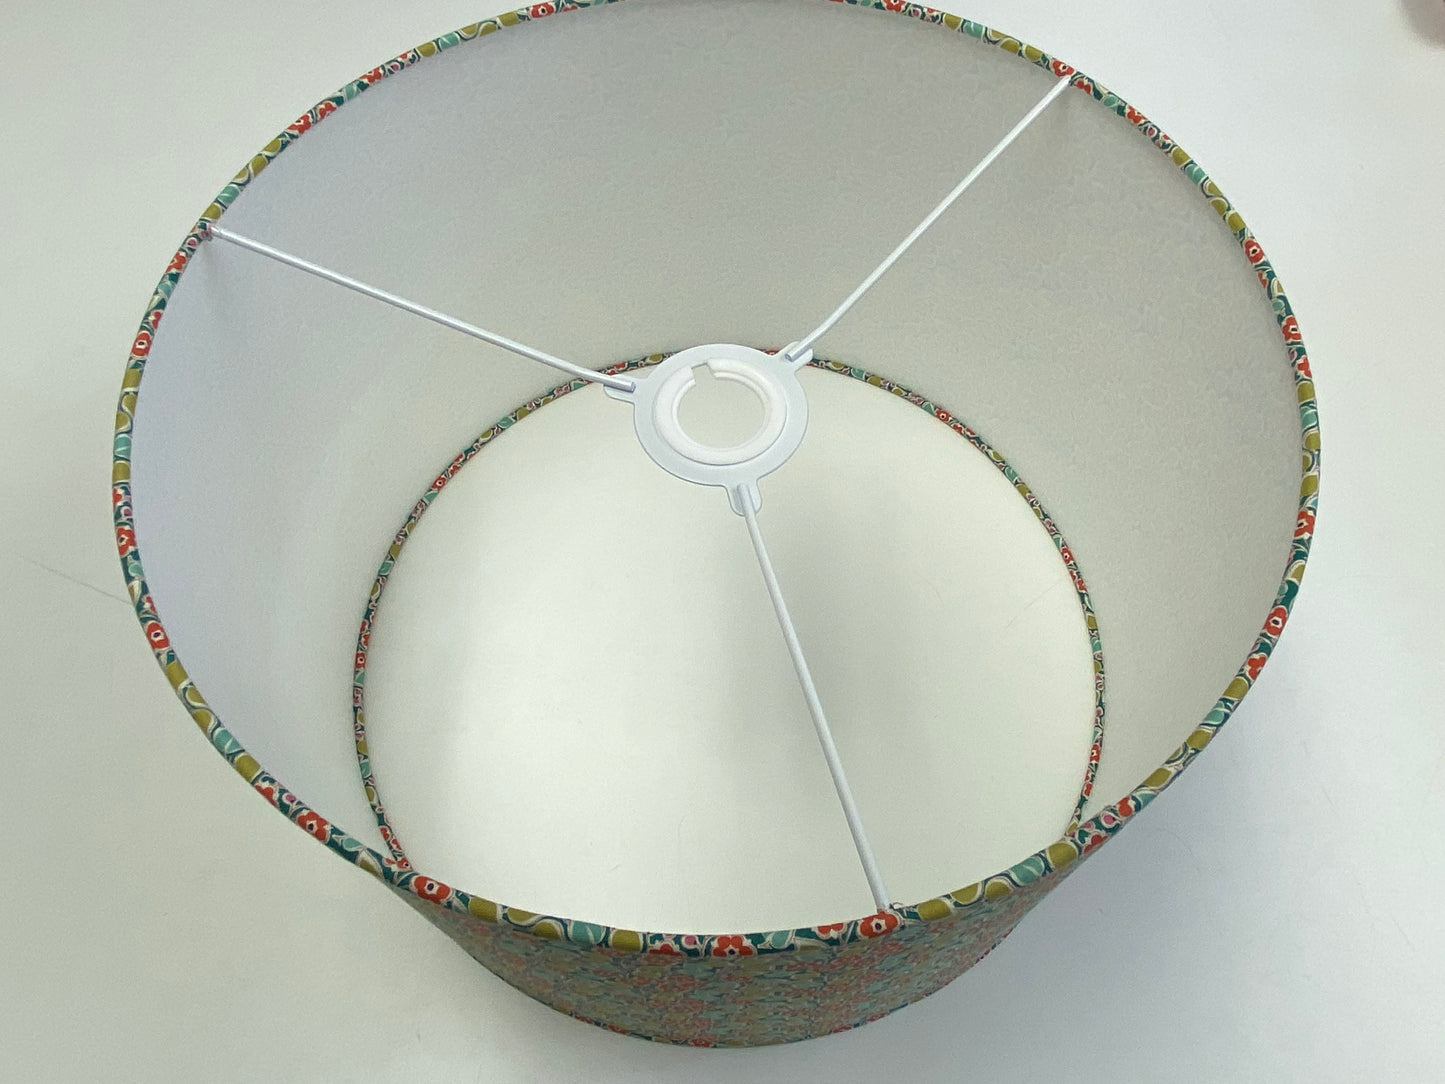 Lampshade Kit - 20cm Drum Shape for Pendant or Table Lamp use